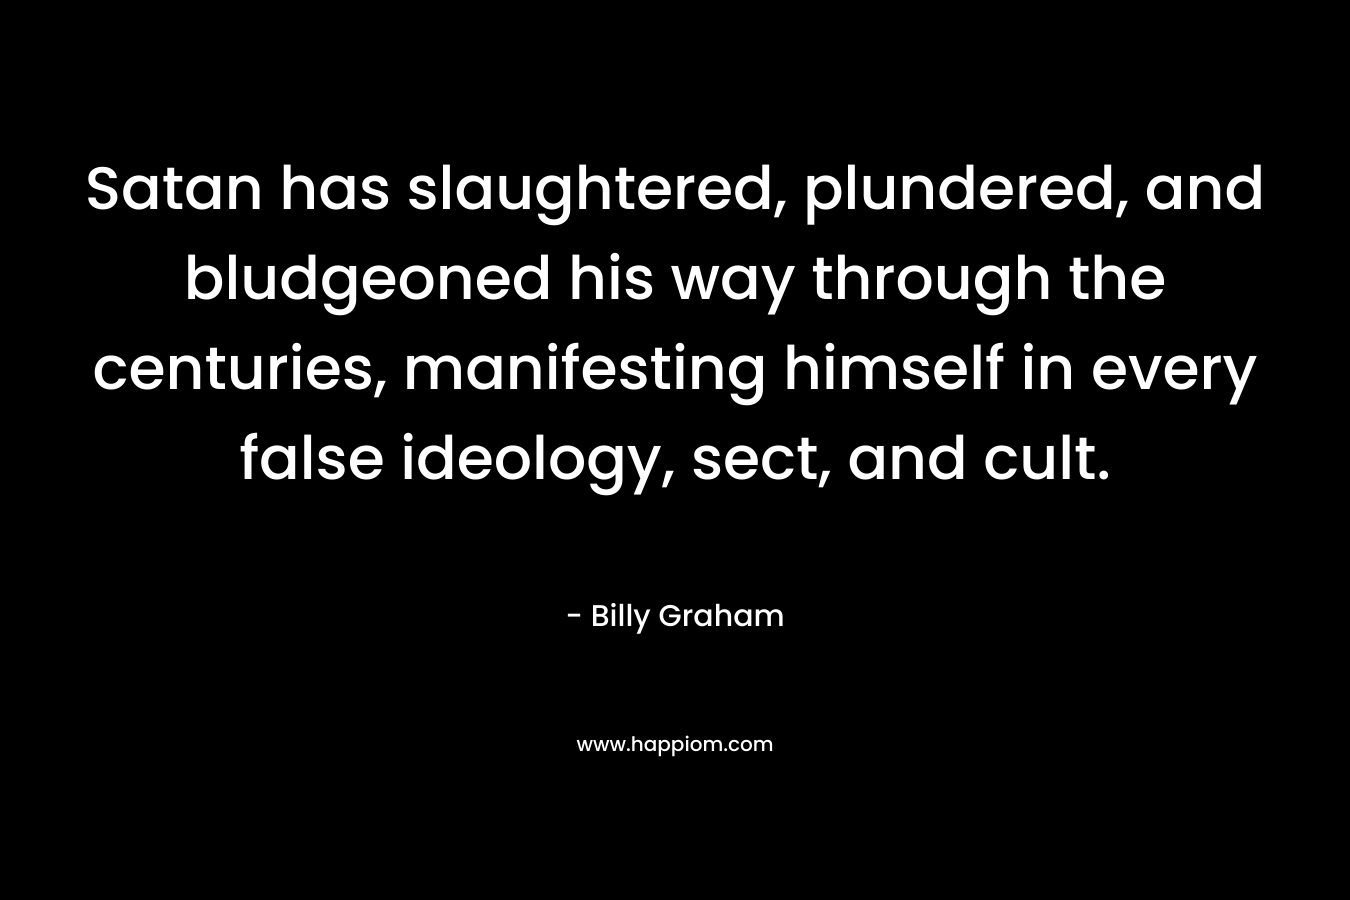 Satan has slaughtered, plundered, and bludgeoned his way through the centuries, manifesting himself in every false ideology, sect, and cult. – Billy Graham